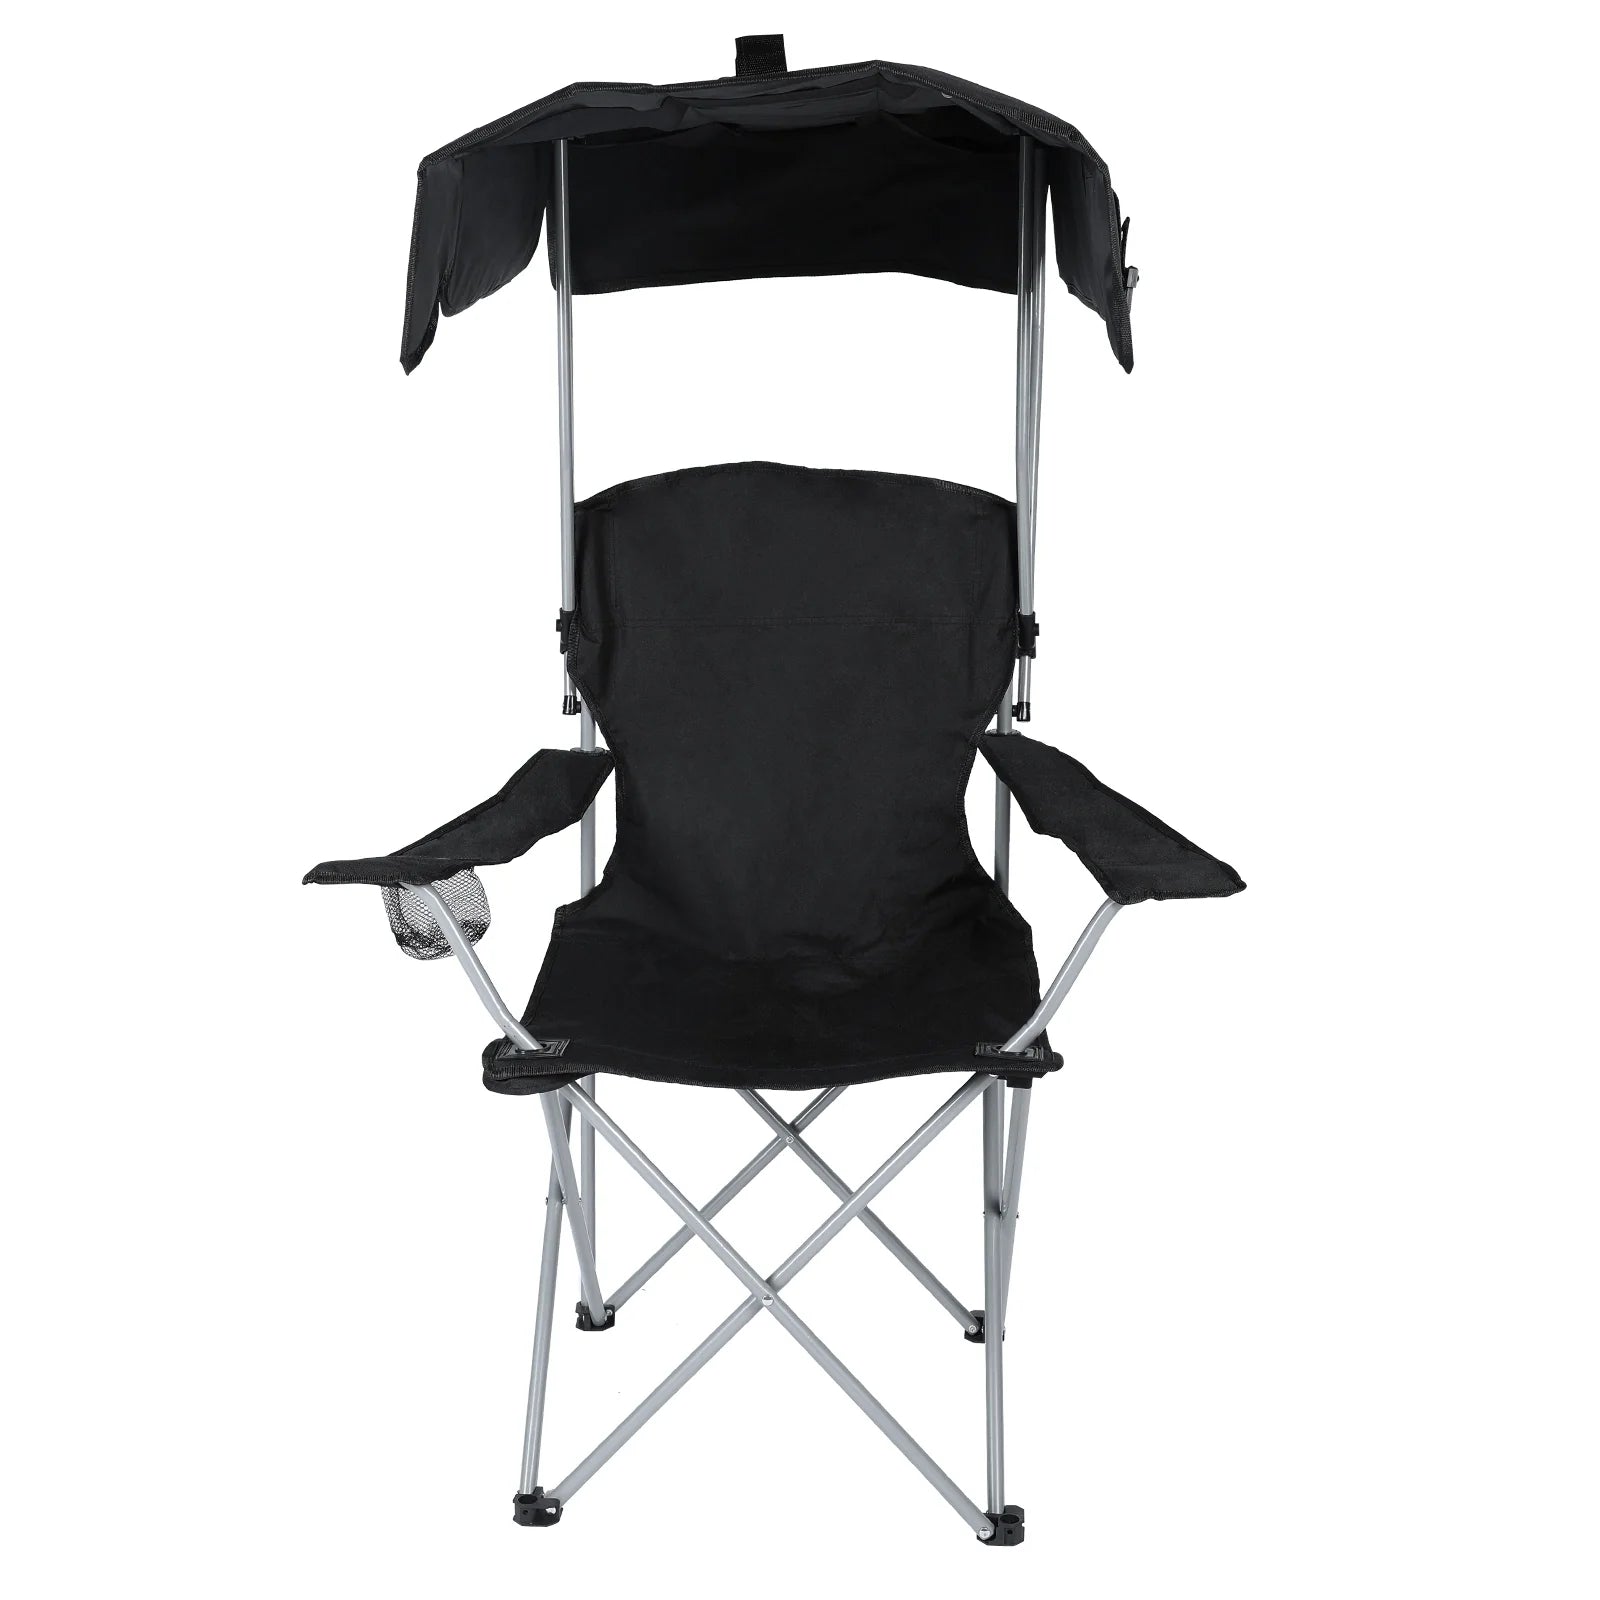 YSSOA Beach Lounge Chair With Sunshade - Camping Chair with Canopy for Hiking, Outdoor & Travel - Black with Cup Holder